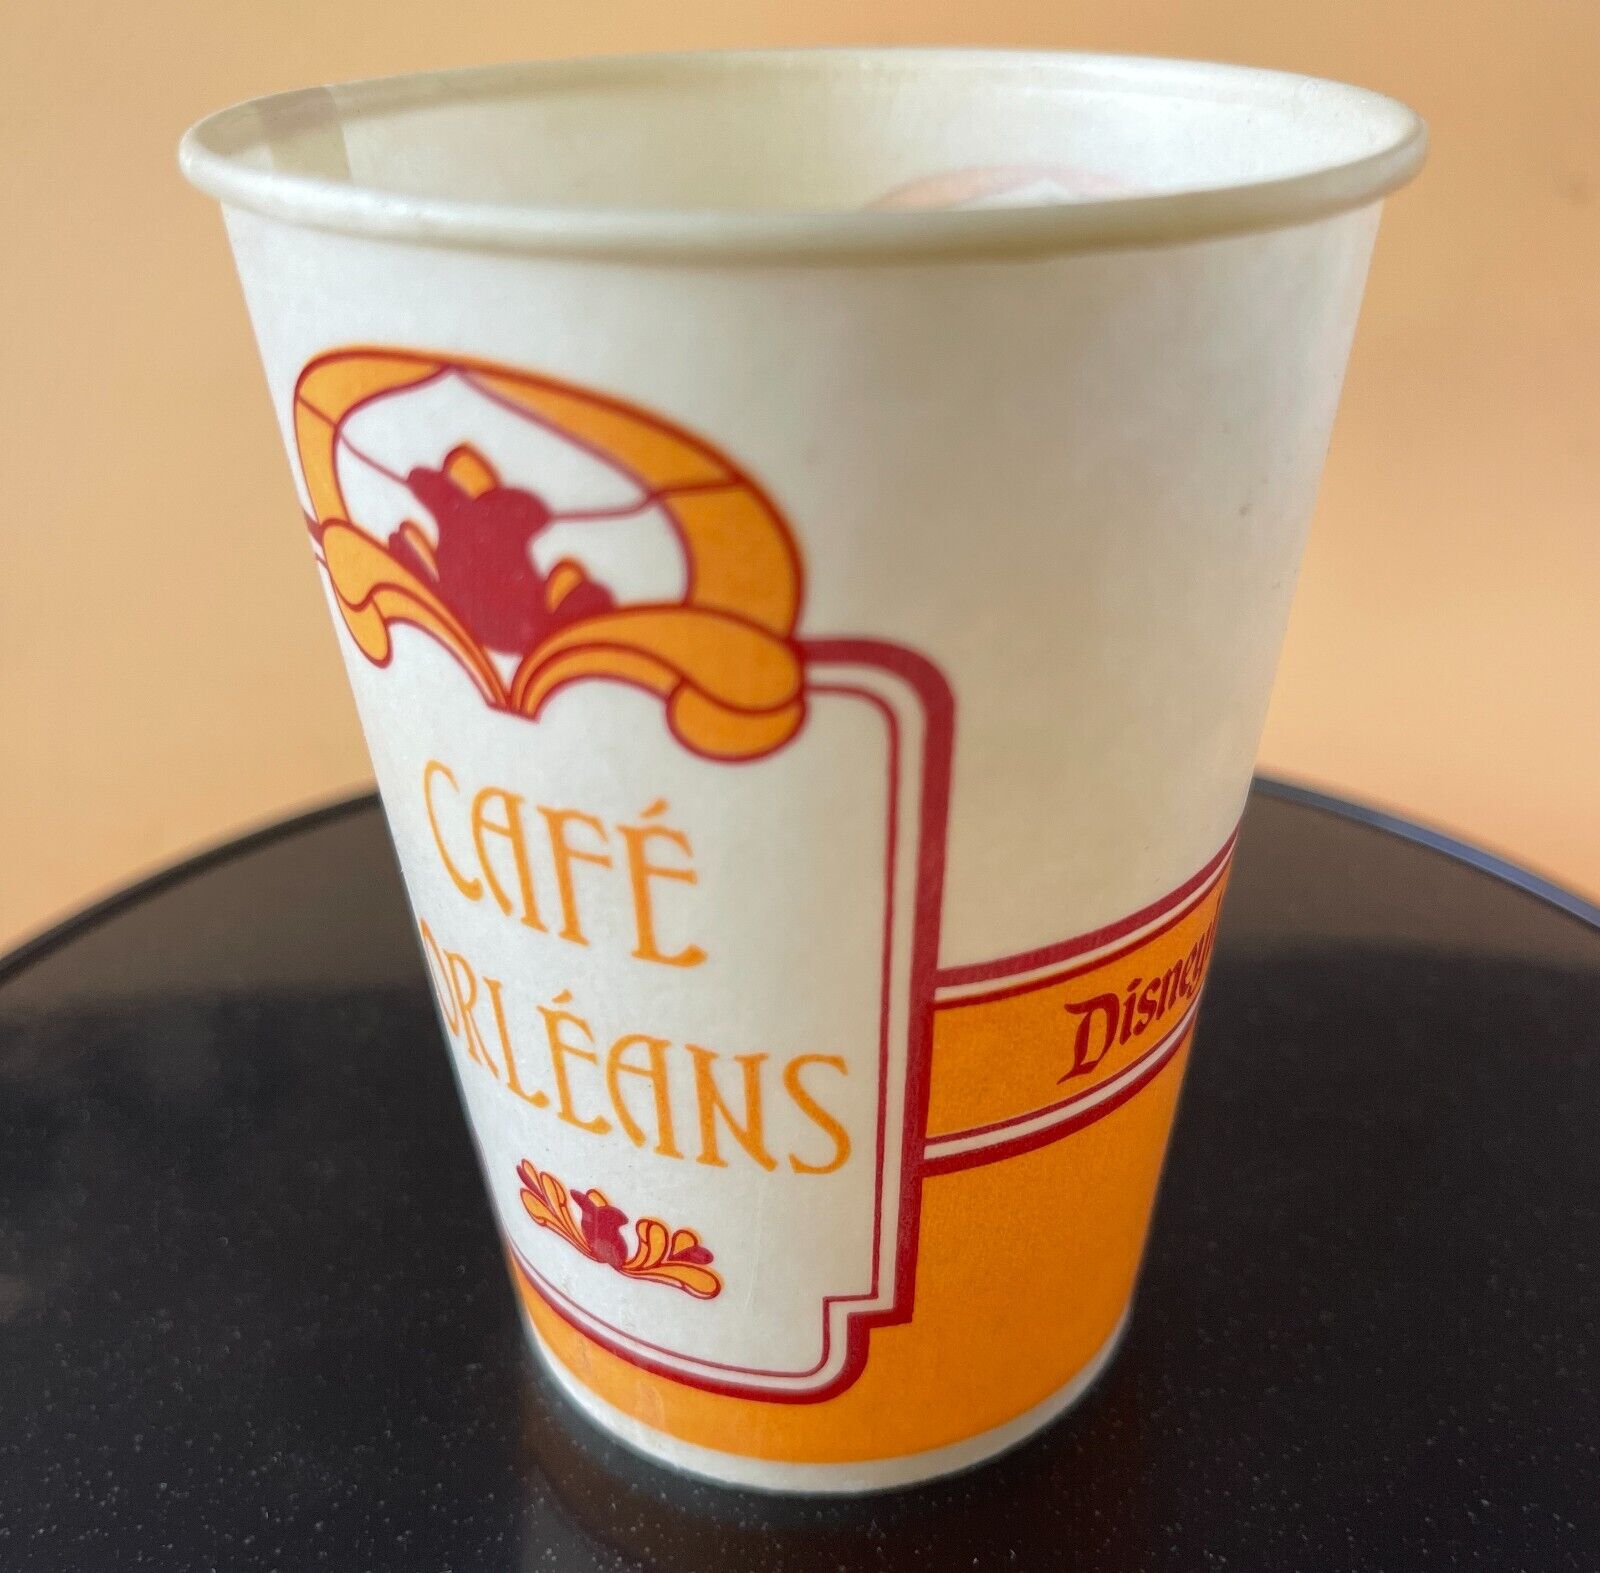 Vintage Disneyland Wax Paper Cup Cafe Orleans Restaurant in New Orleans Square